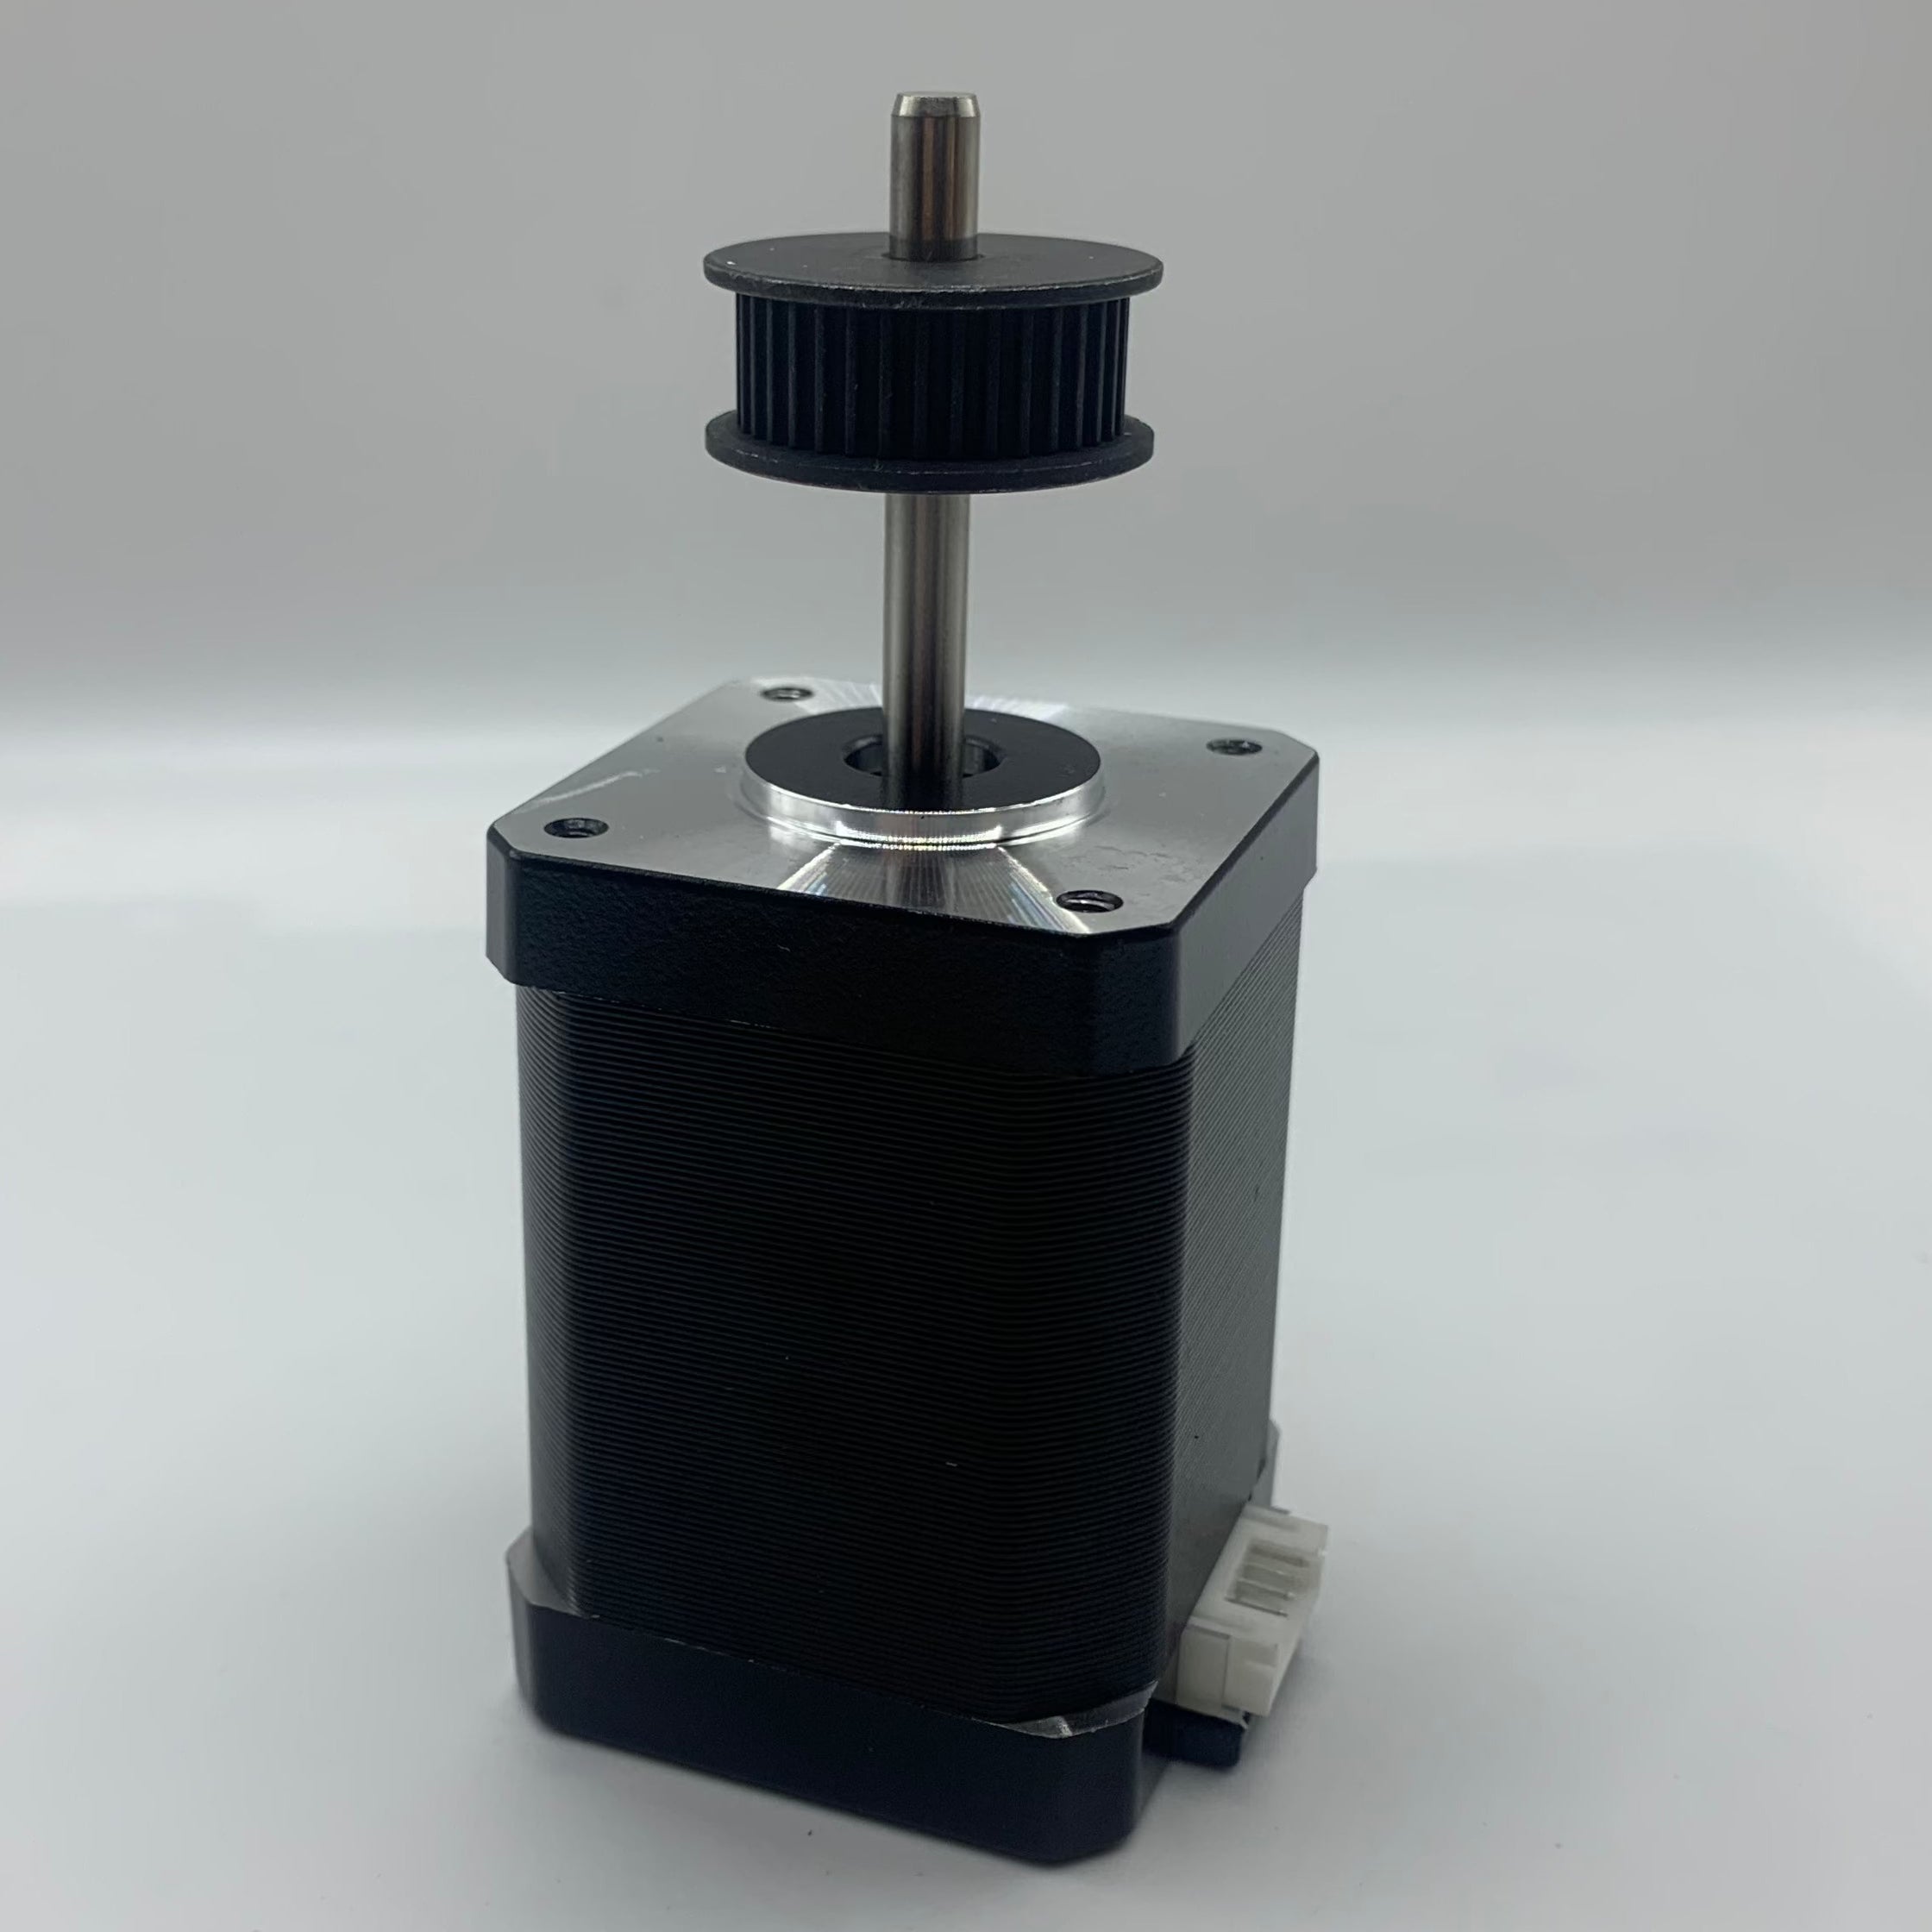 Creality 42-60 Stepper A/B (X/Y) Axis Motor for K1 / K1 Max / K1C